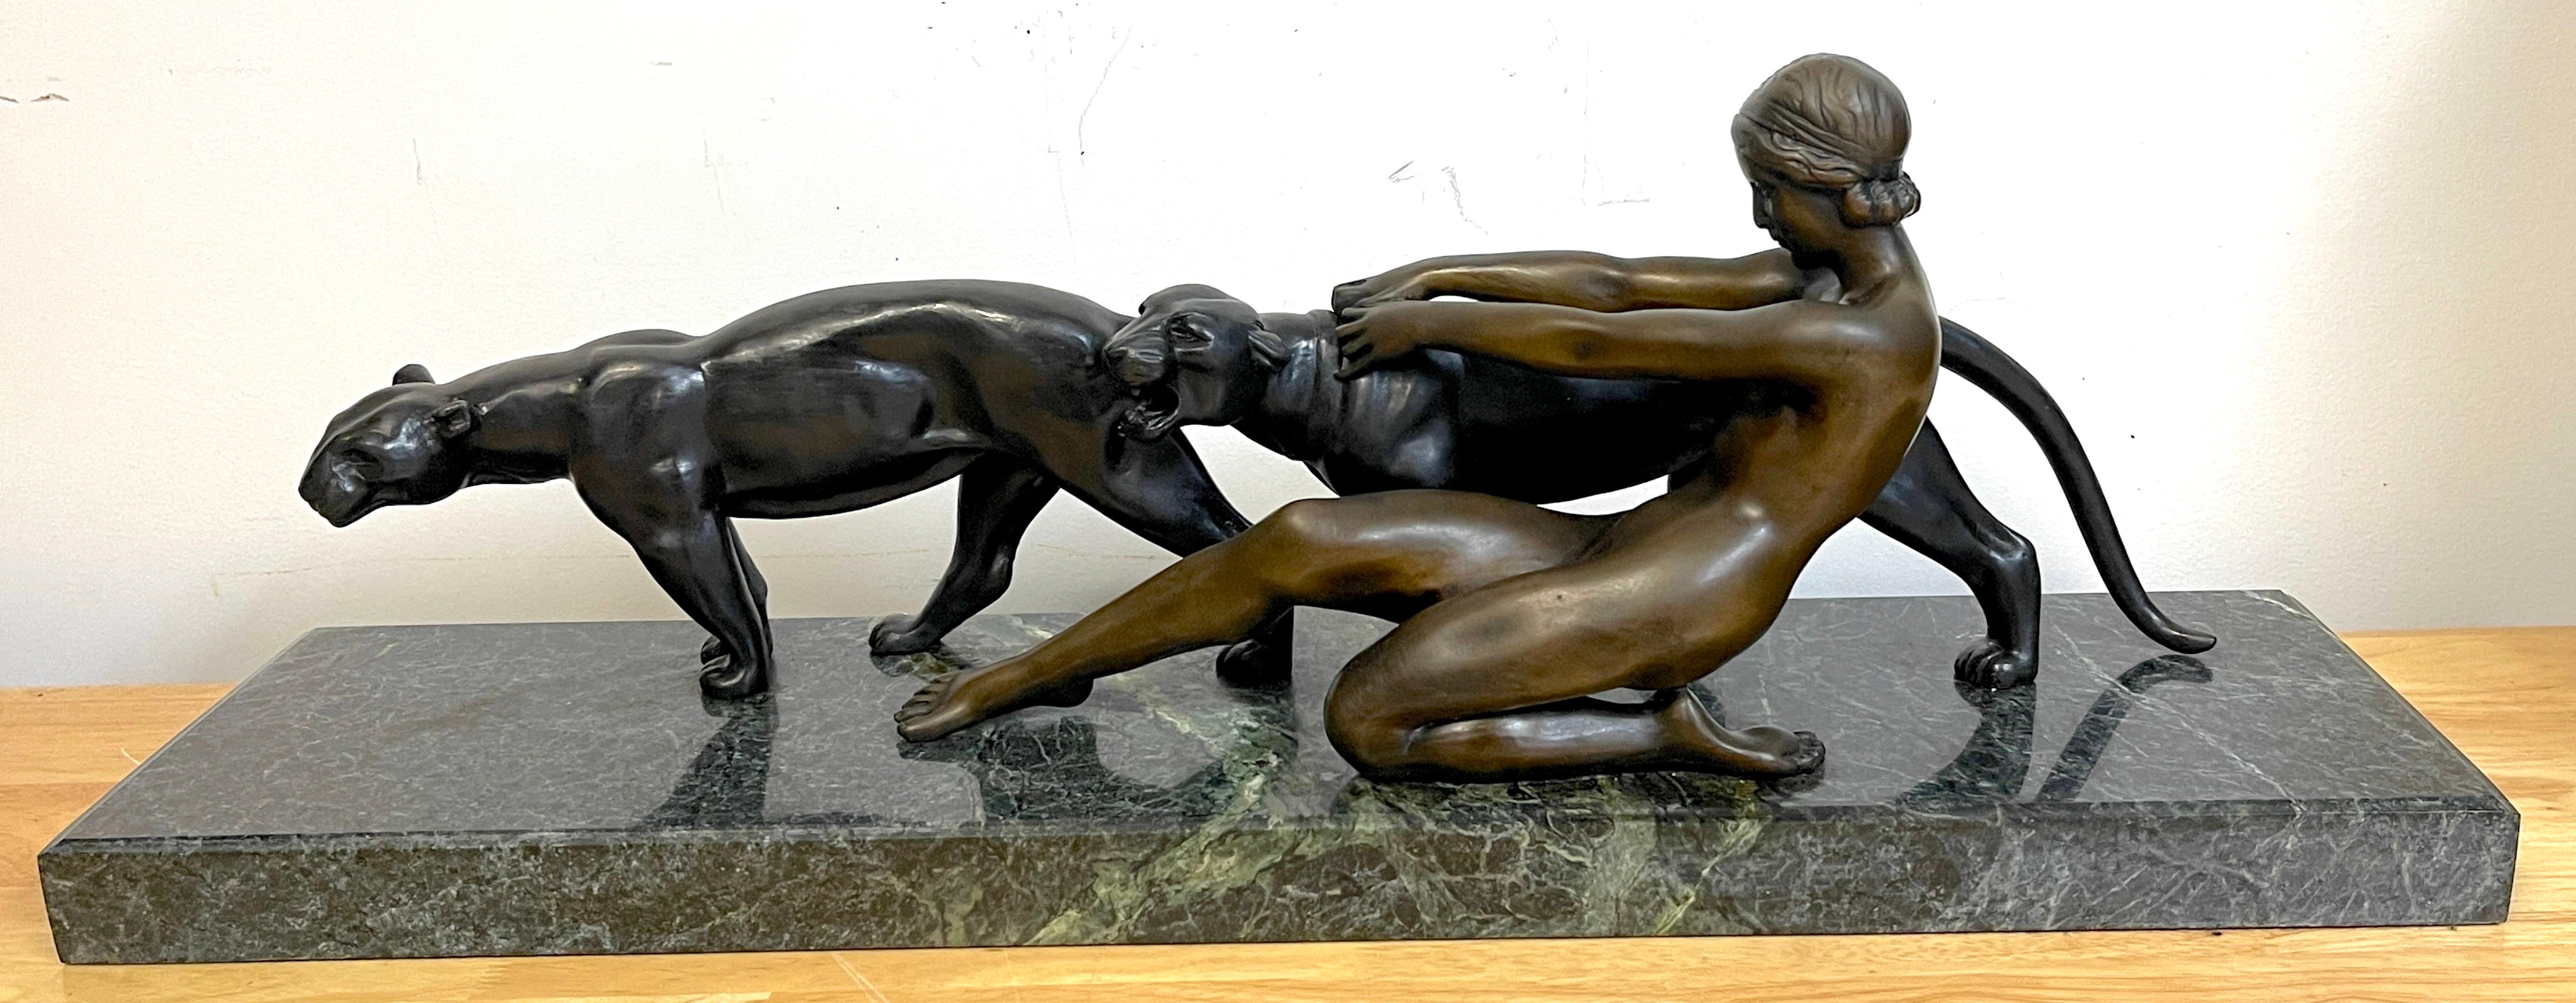 Art Deco bronze lady with two panthers, by Alexandre Ouline 
Alexandre Ouline (Belgian, active circa 1918–1940)
A fine example of period Art Deco Sculpture, a substantial work, beautifully cast and modeled. Unsigned. 
Raised on a thick verdigris